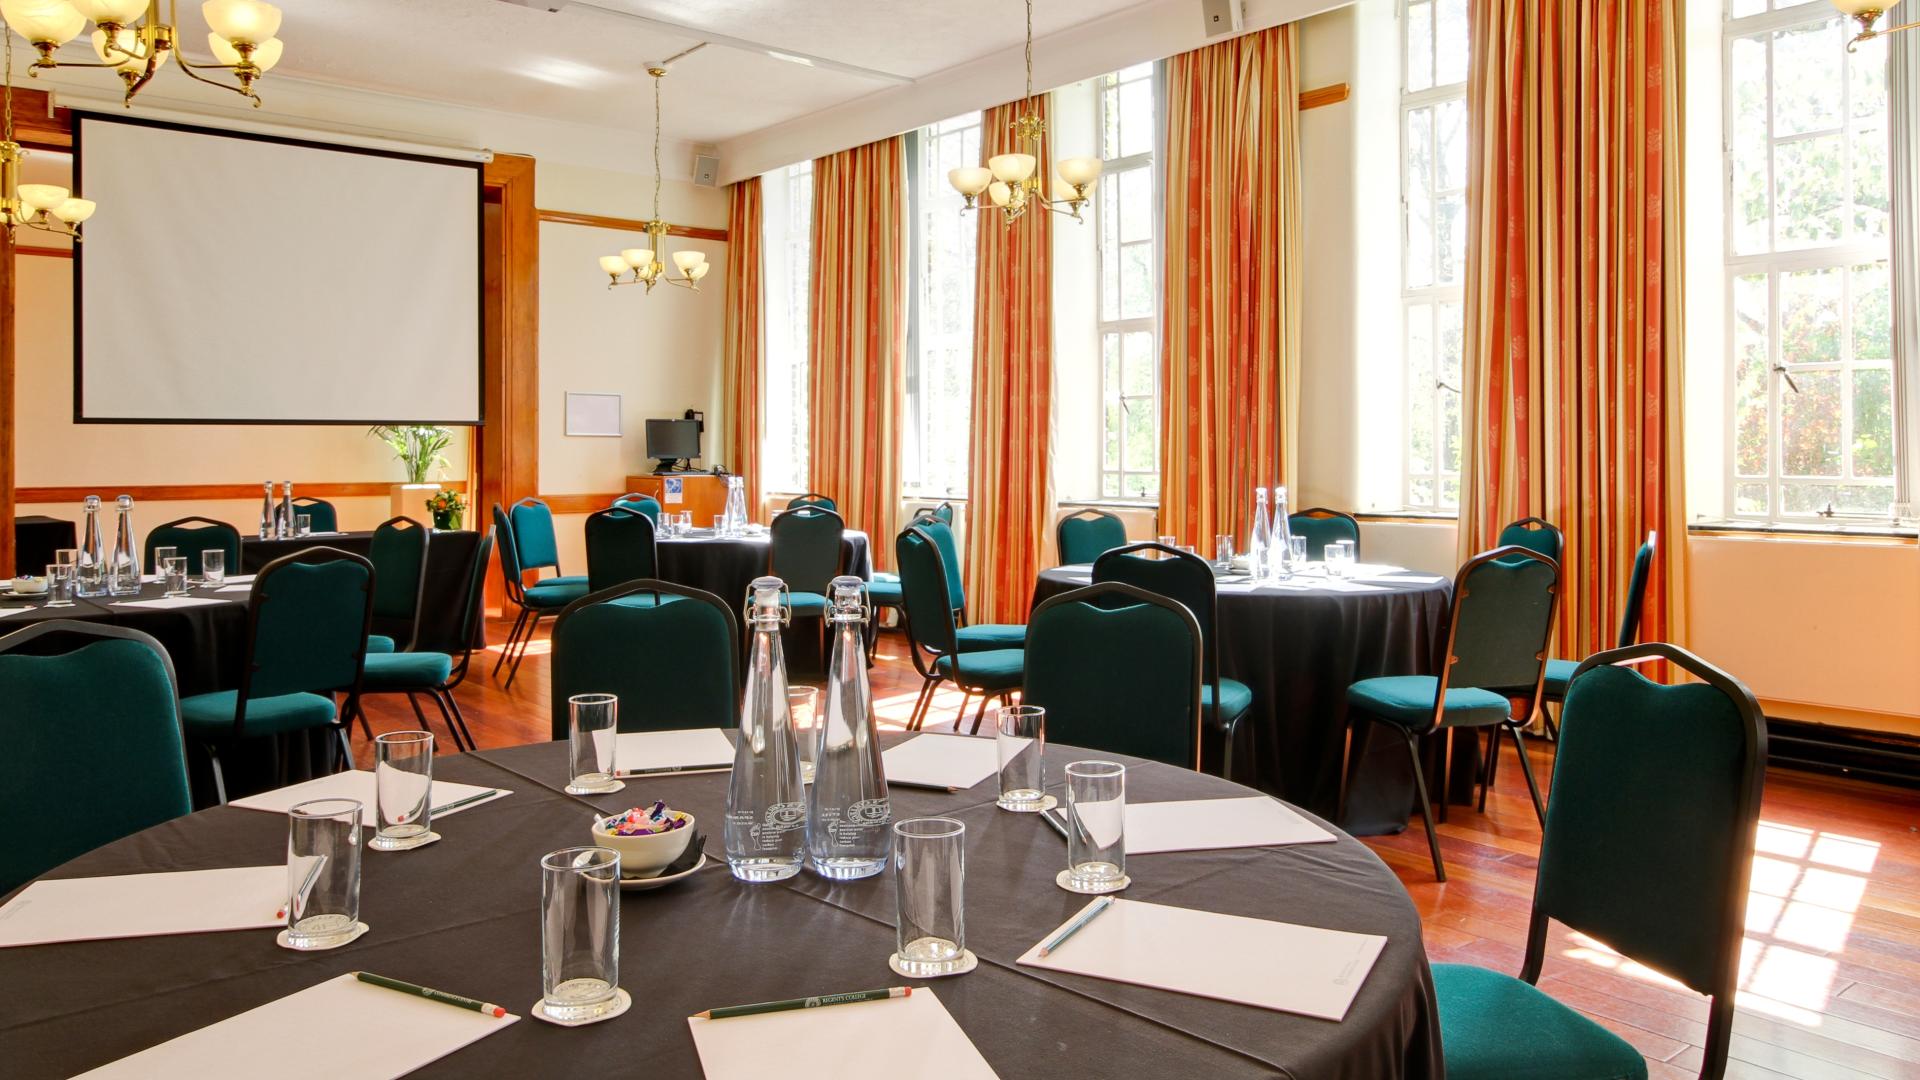 Function Rooms for Hire in Tower Hamlets